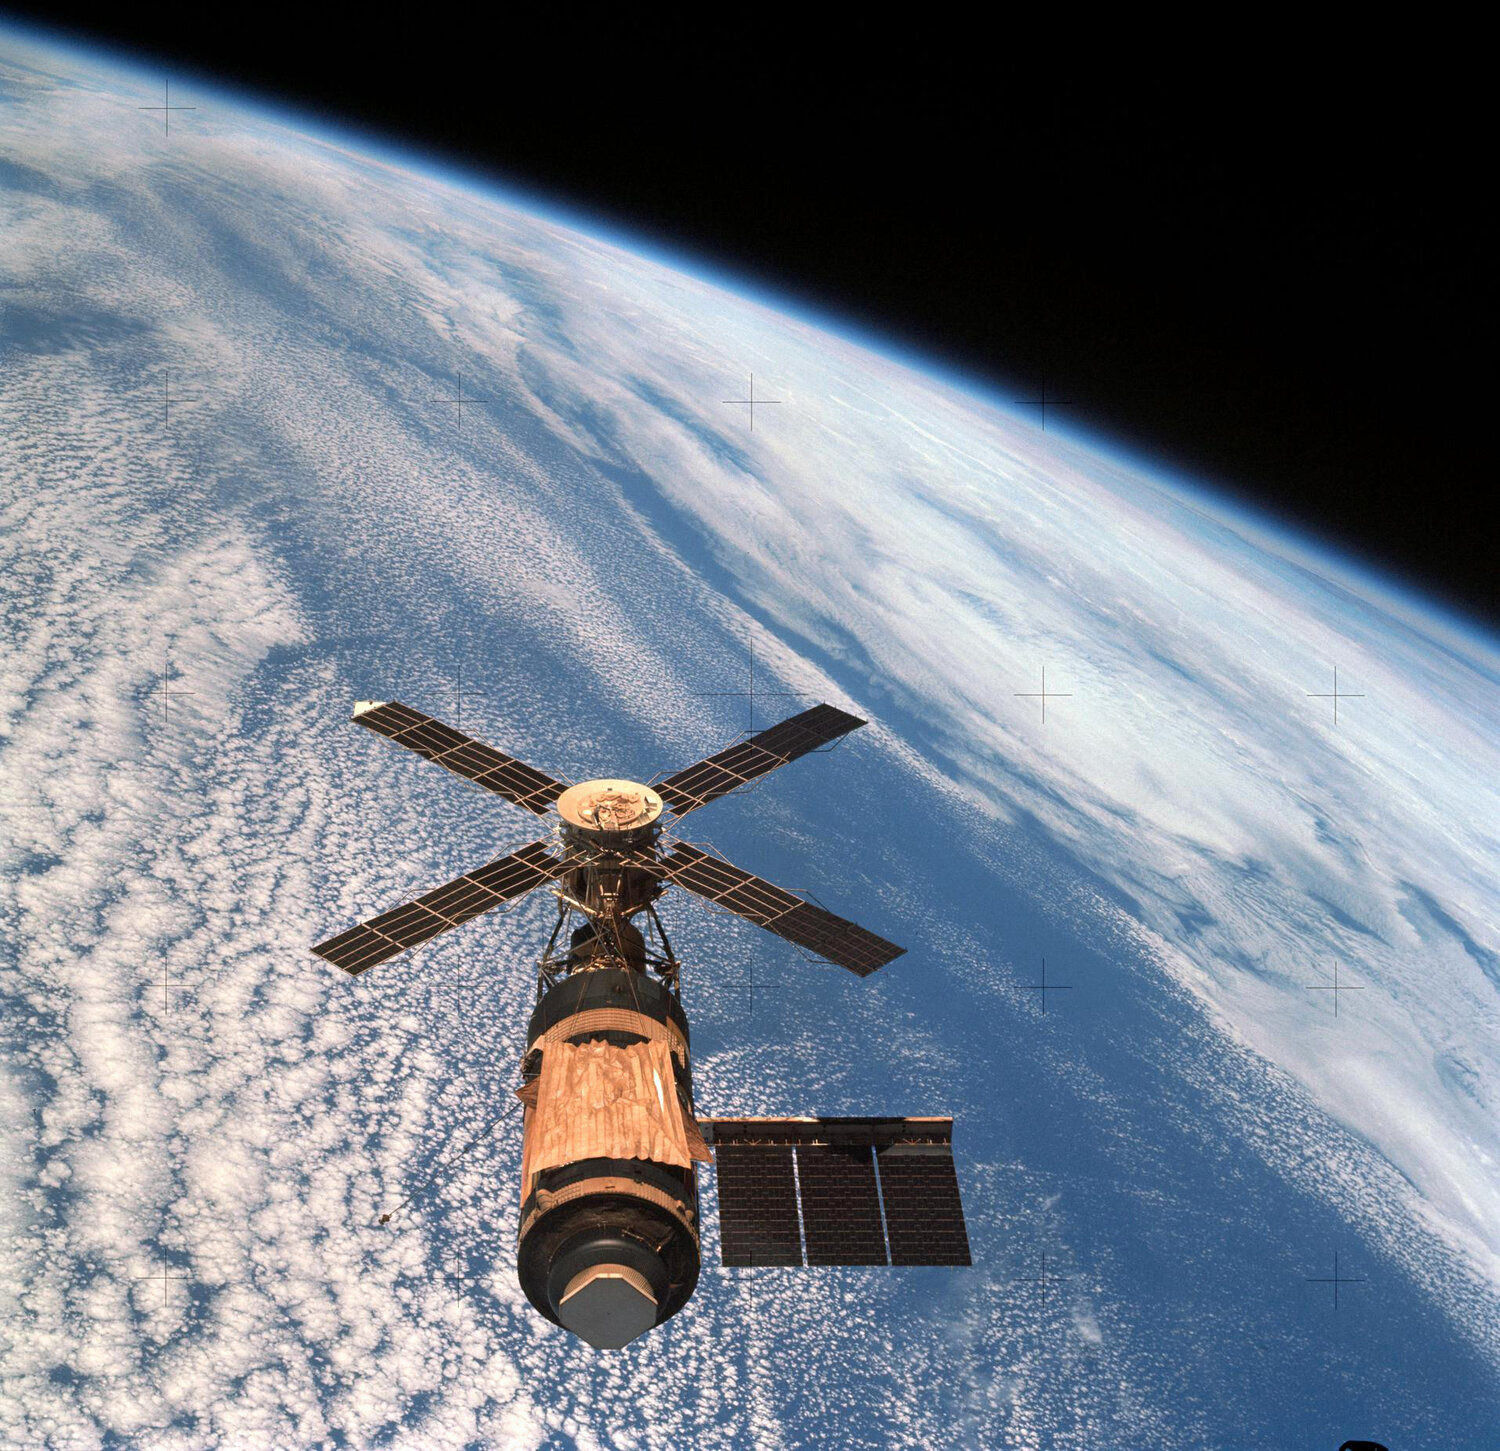 Skylab orbits the Earth in 1974. The converted rocket booster orbited the planet as a laboratory for five years.